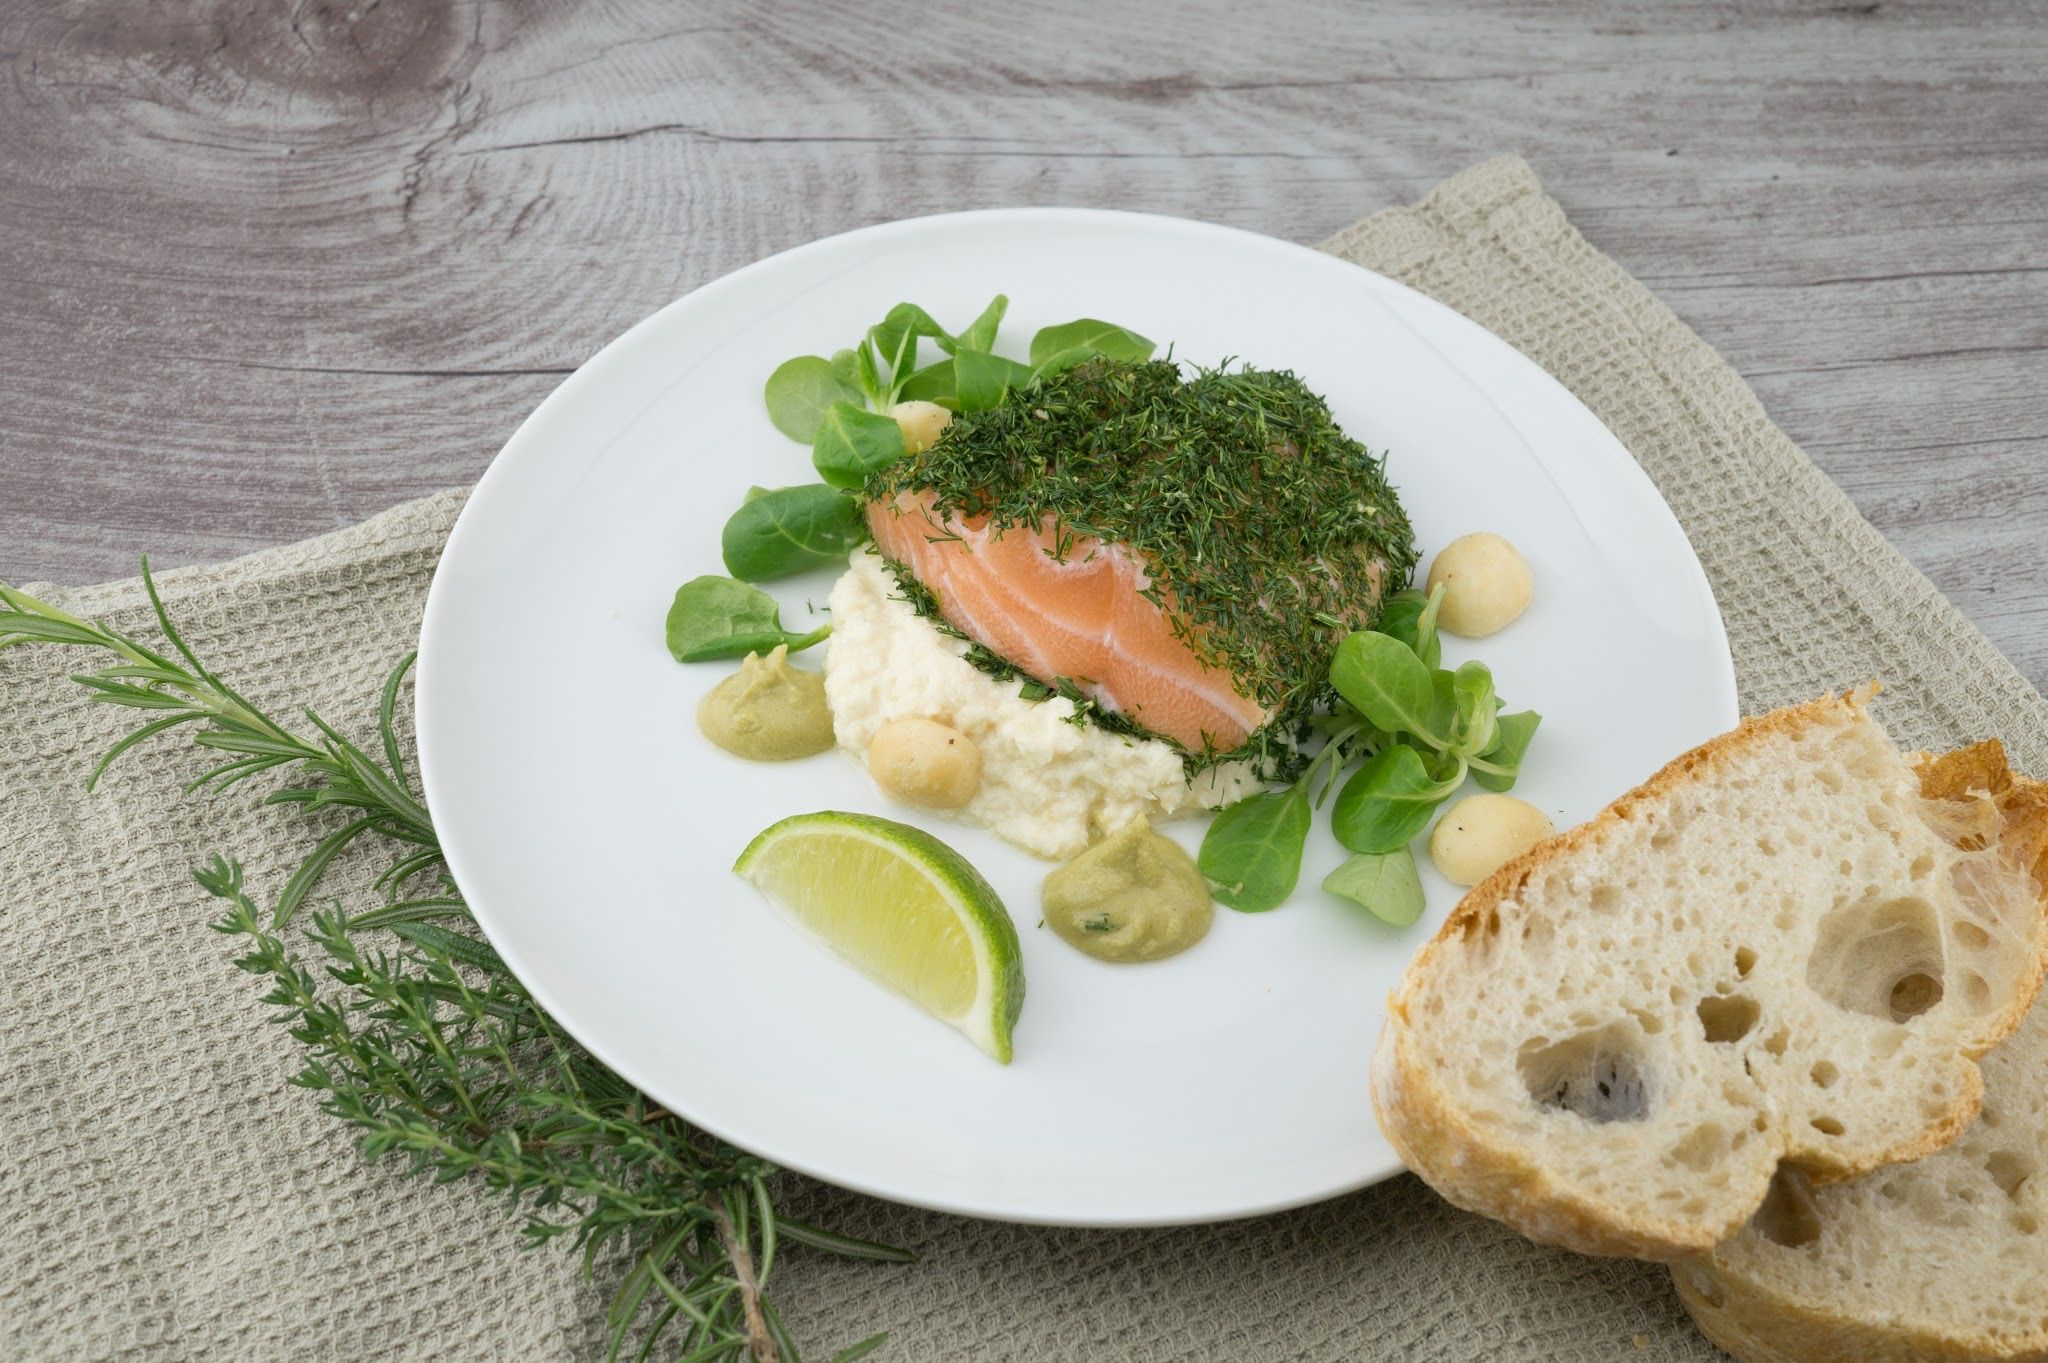 2048x1363 #food, #white plate, #rosemary, #plate, #herb